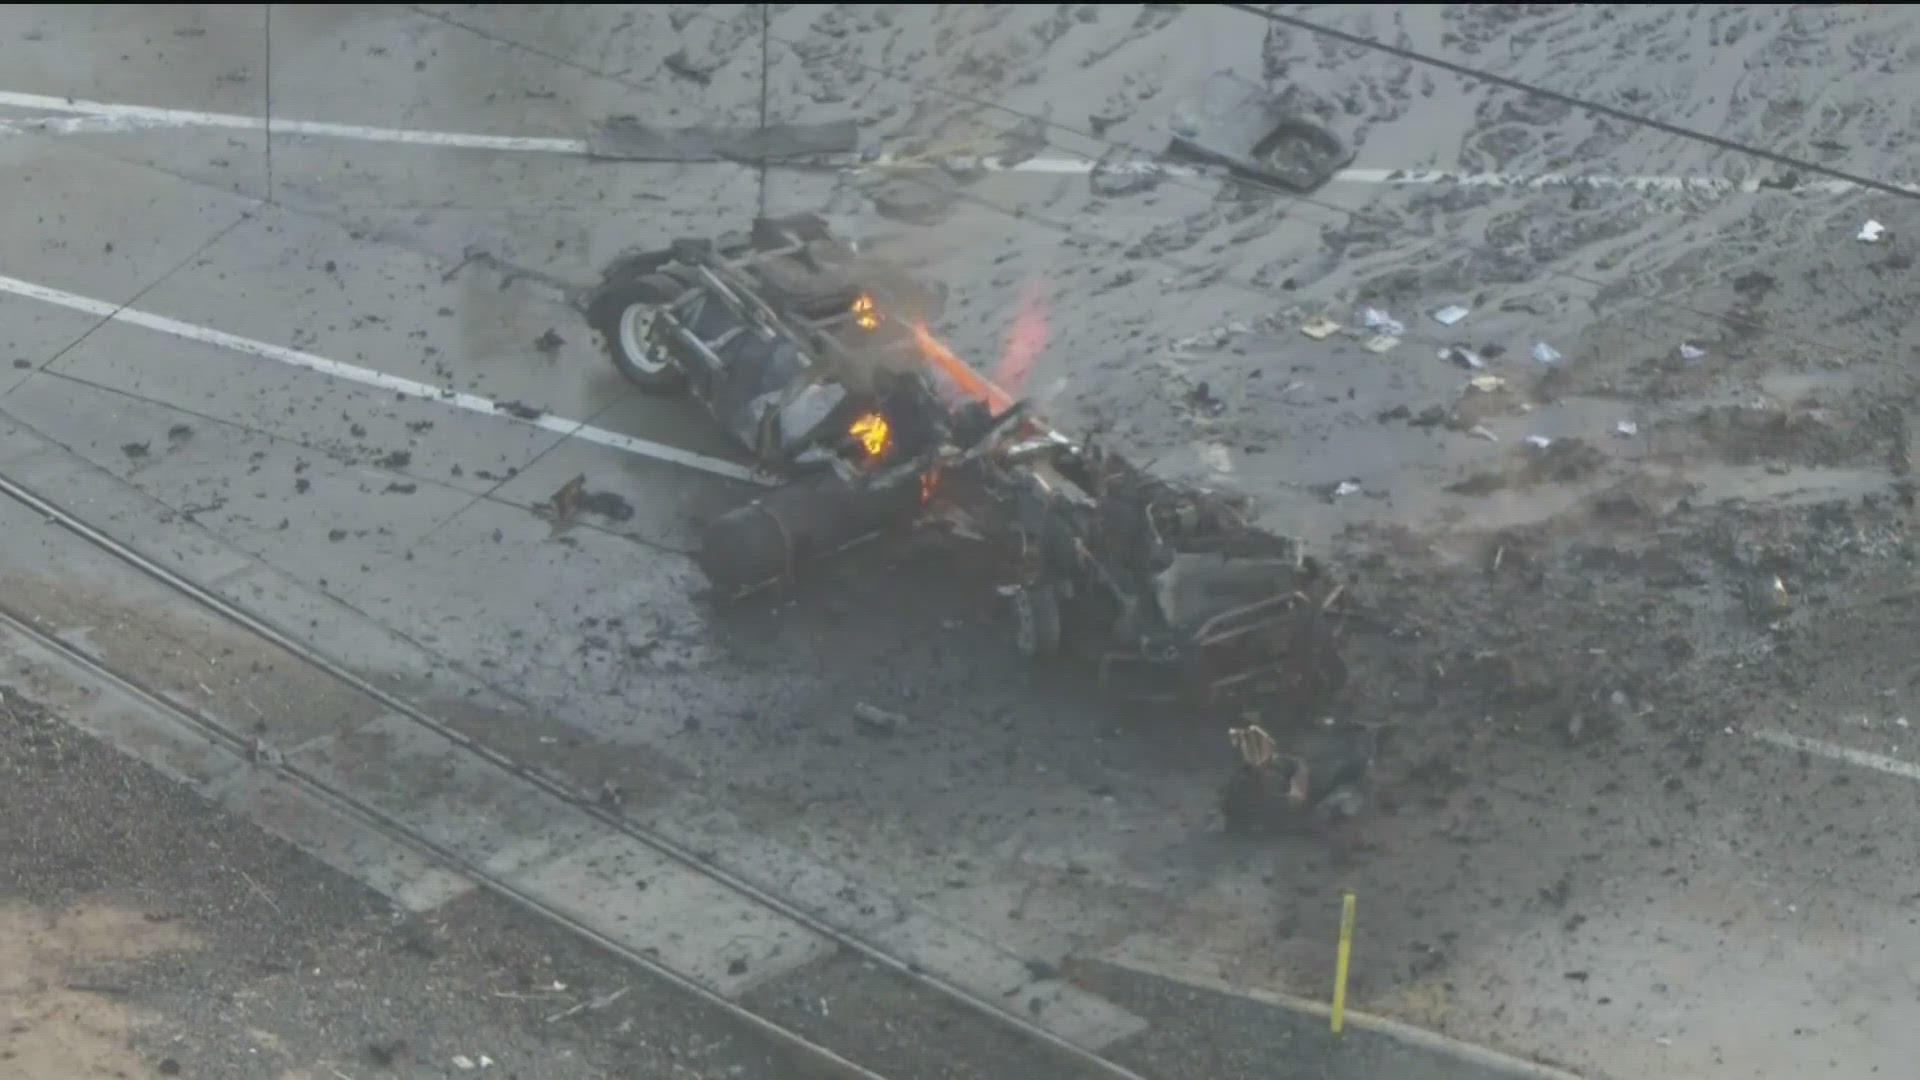 Firefighters injured by truck explosion in Wilmington area | cbs8.com